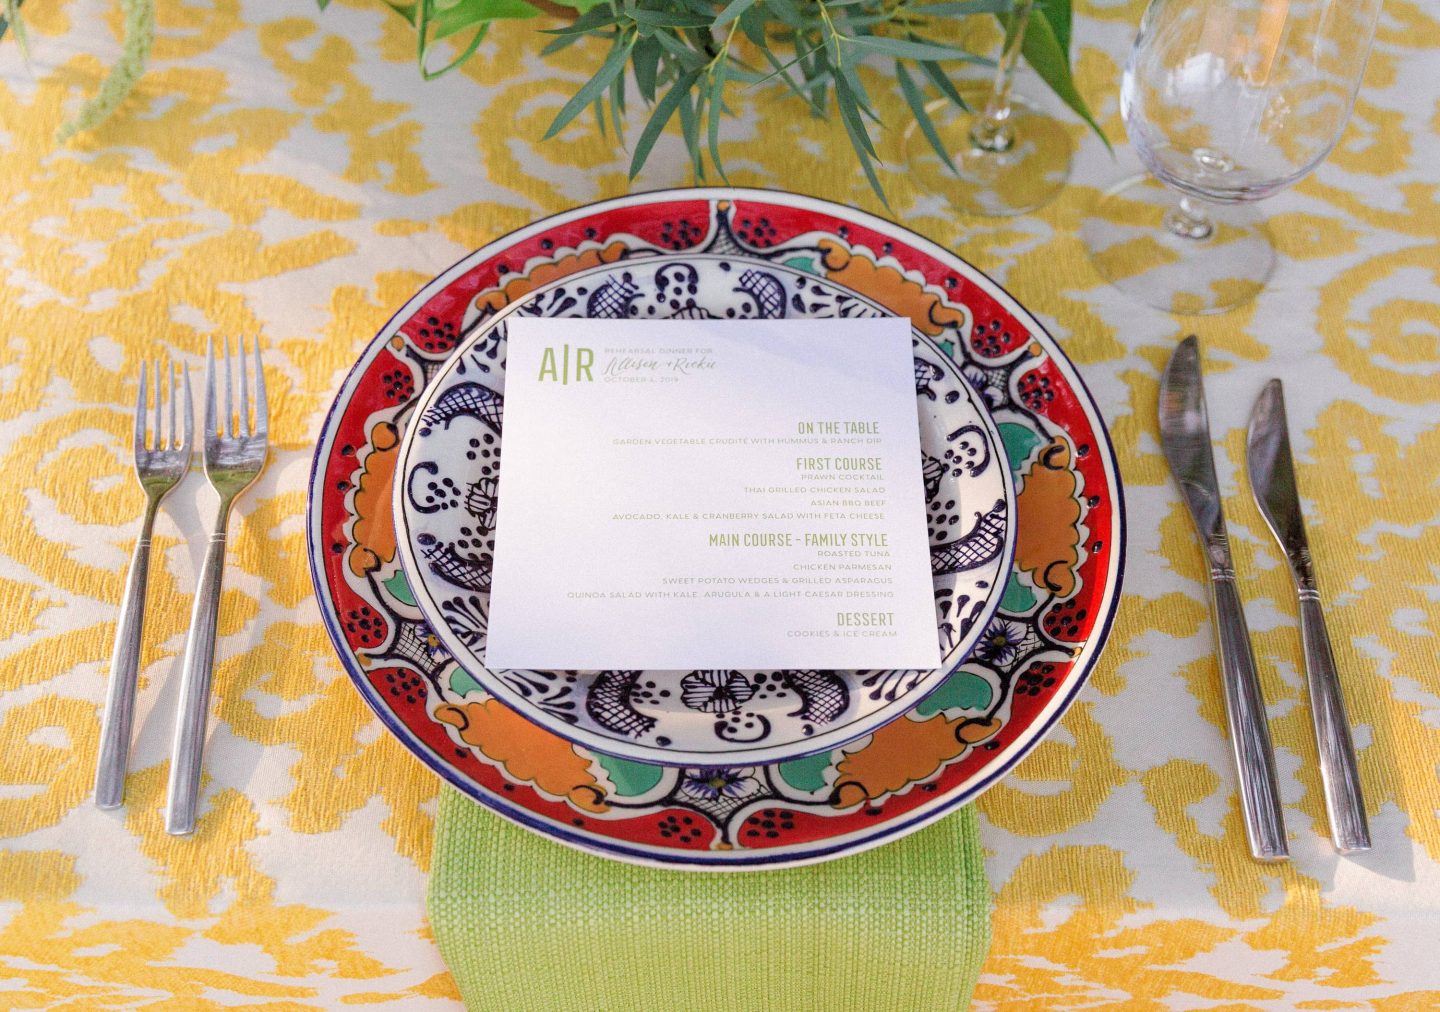 Table setting and menu at this Los Cabos wedding in Mexico | Photo by Allan Zepeda